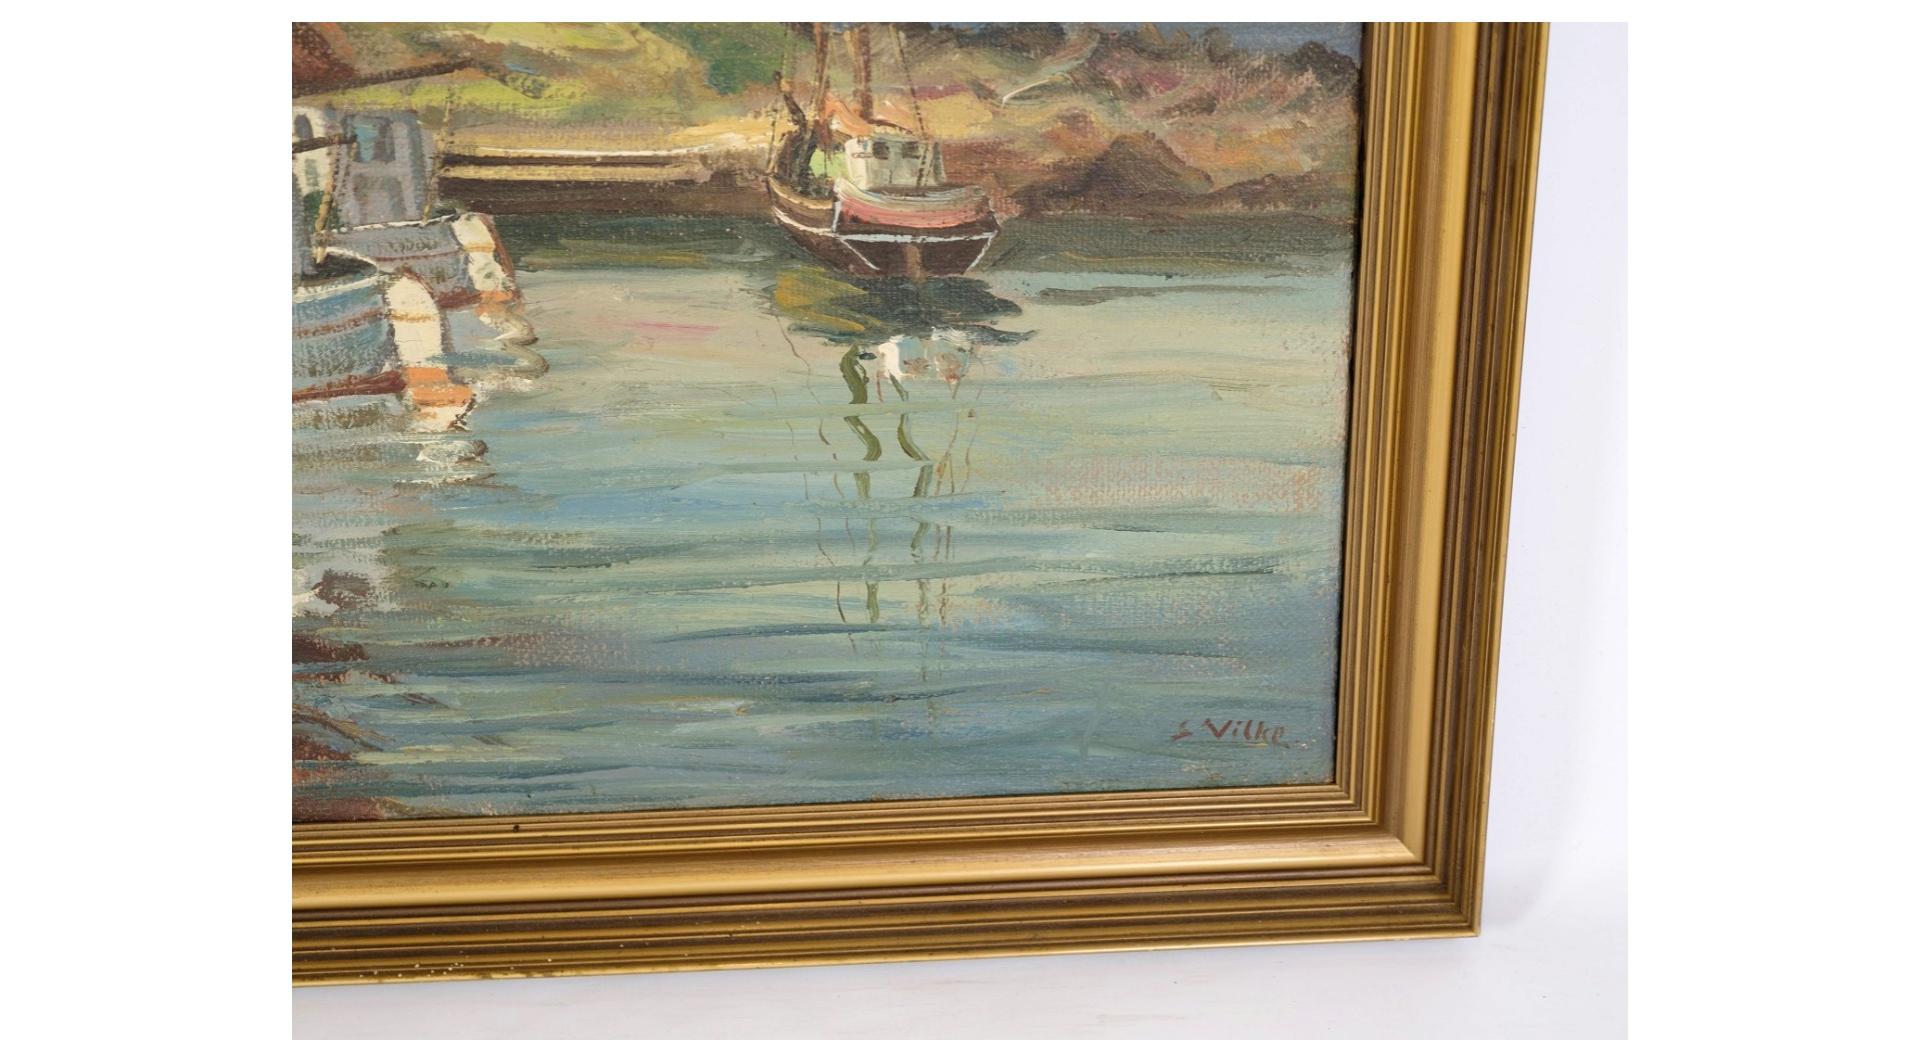 Scandinavian Modern Large Oil Painting On Canvas With Motif Of Fishing Boats Near Shore From 1930s For Sale